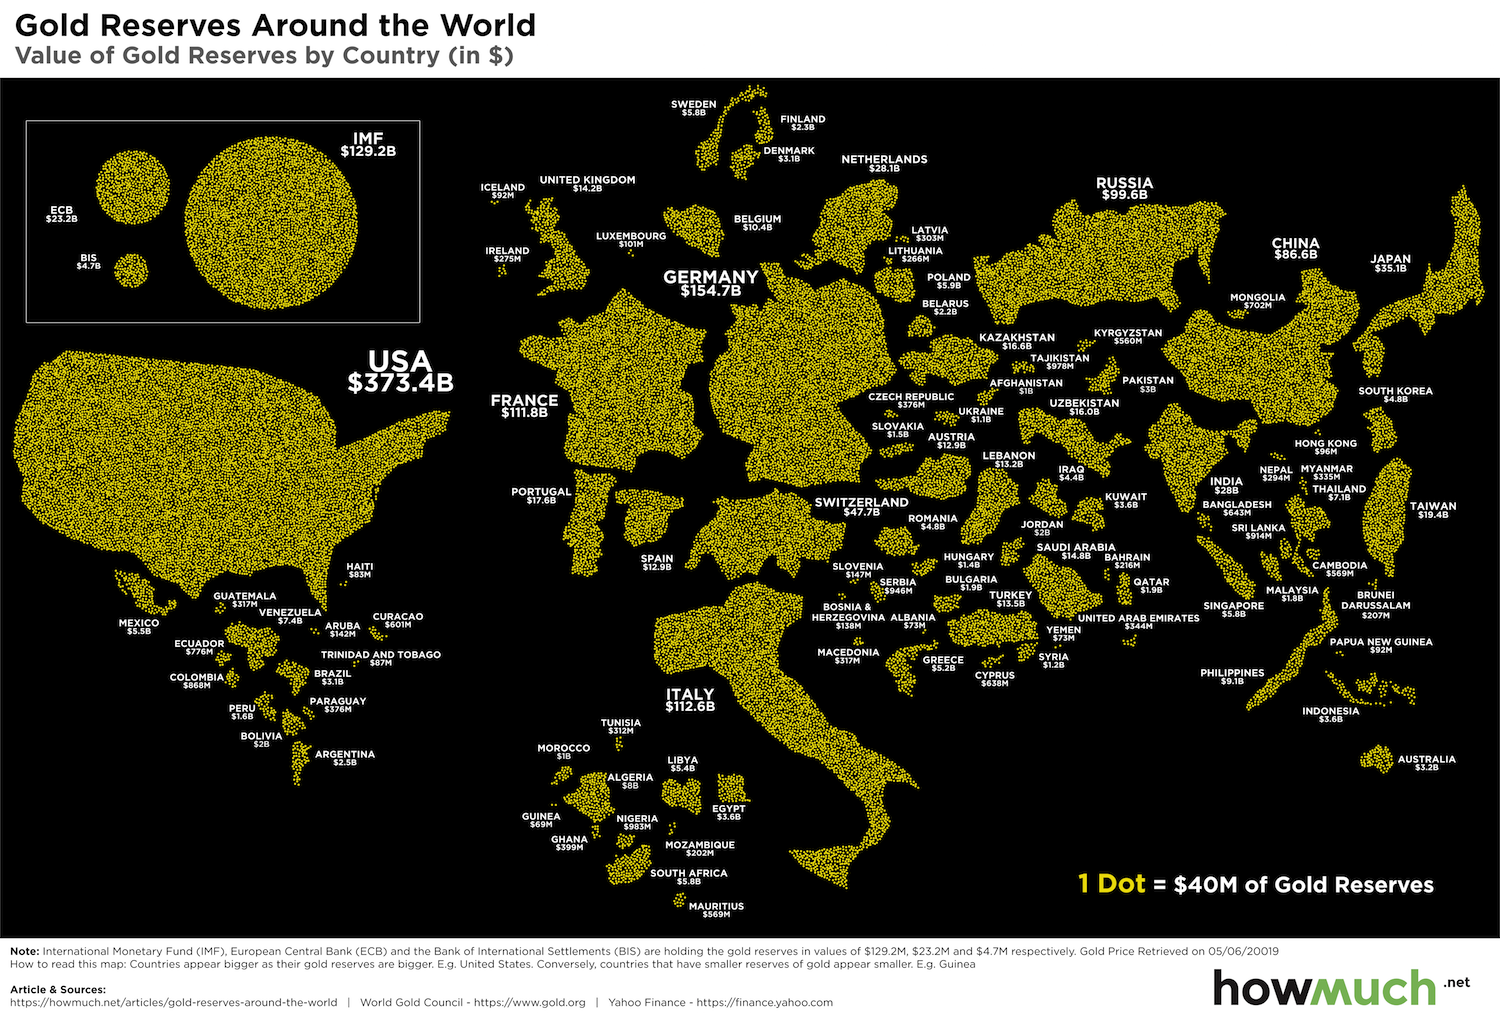 Who owns the world’s gold reserves